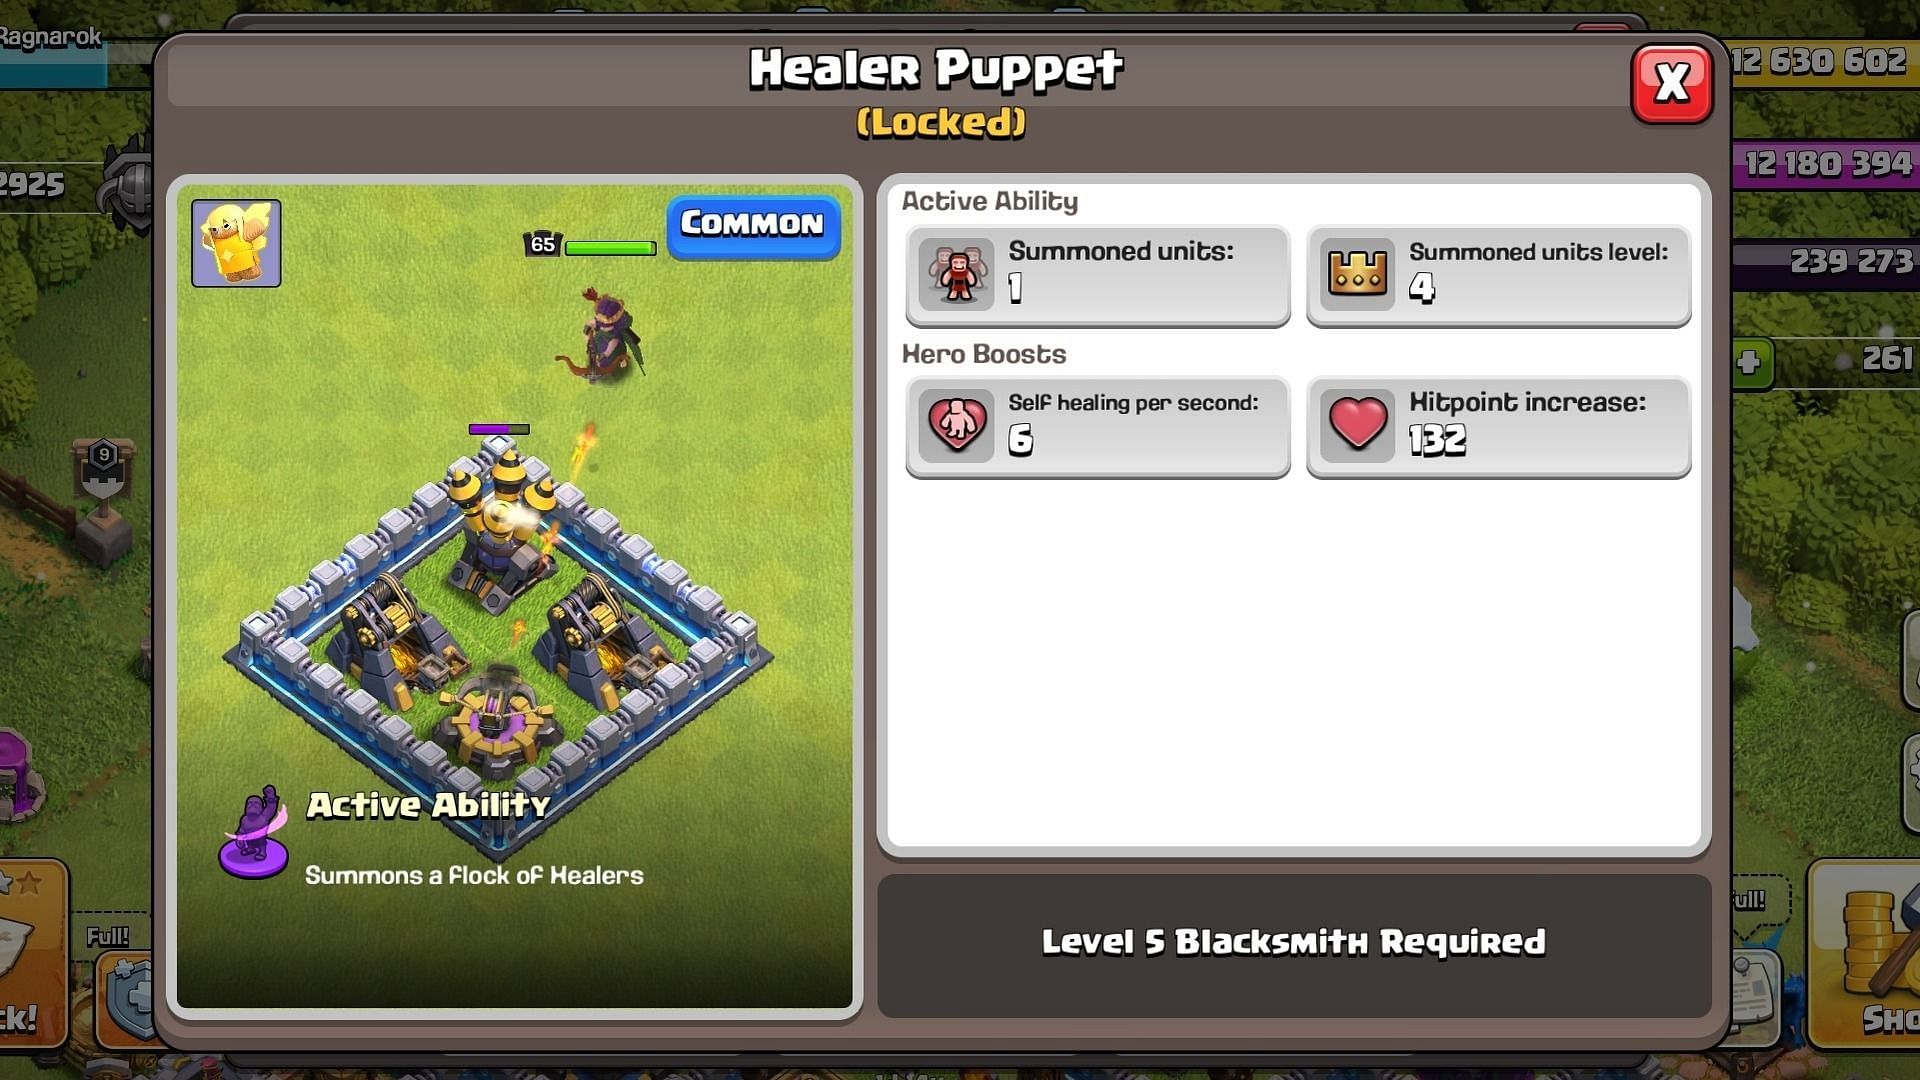 Clash of Clans Healer Puppet stats (Image via Supercell)